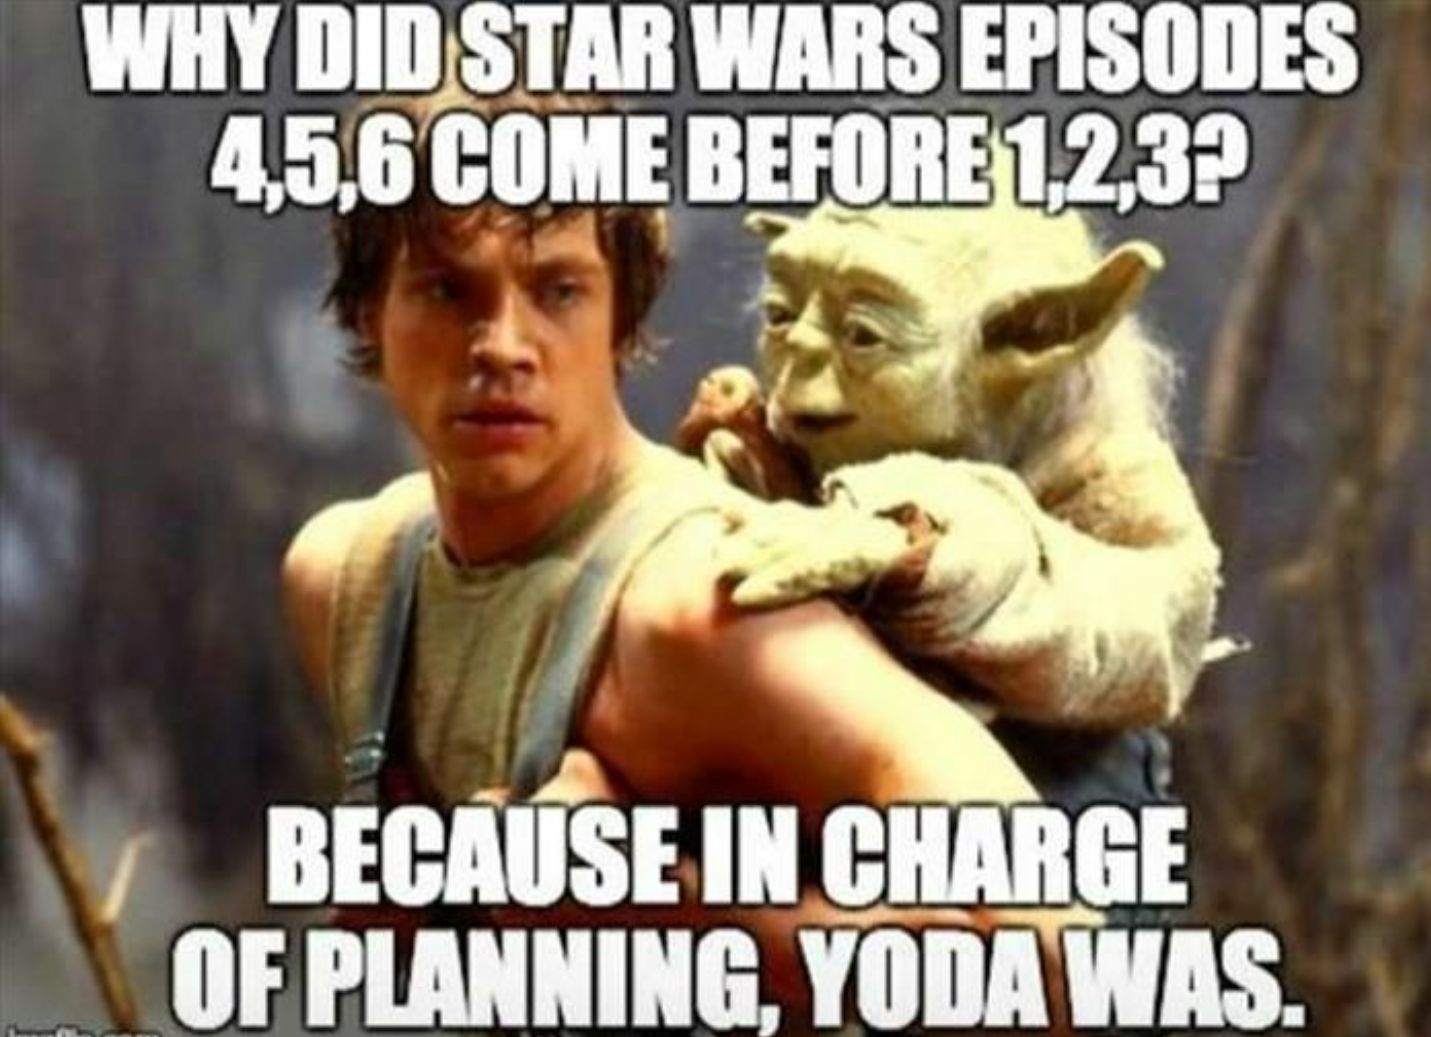 Can star wars fans confirm?